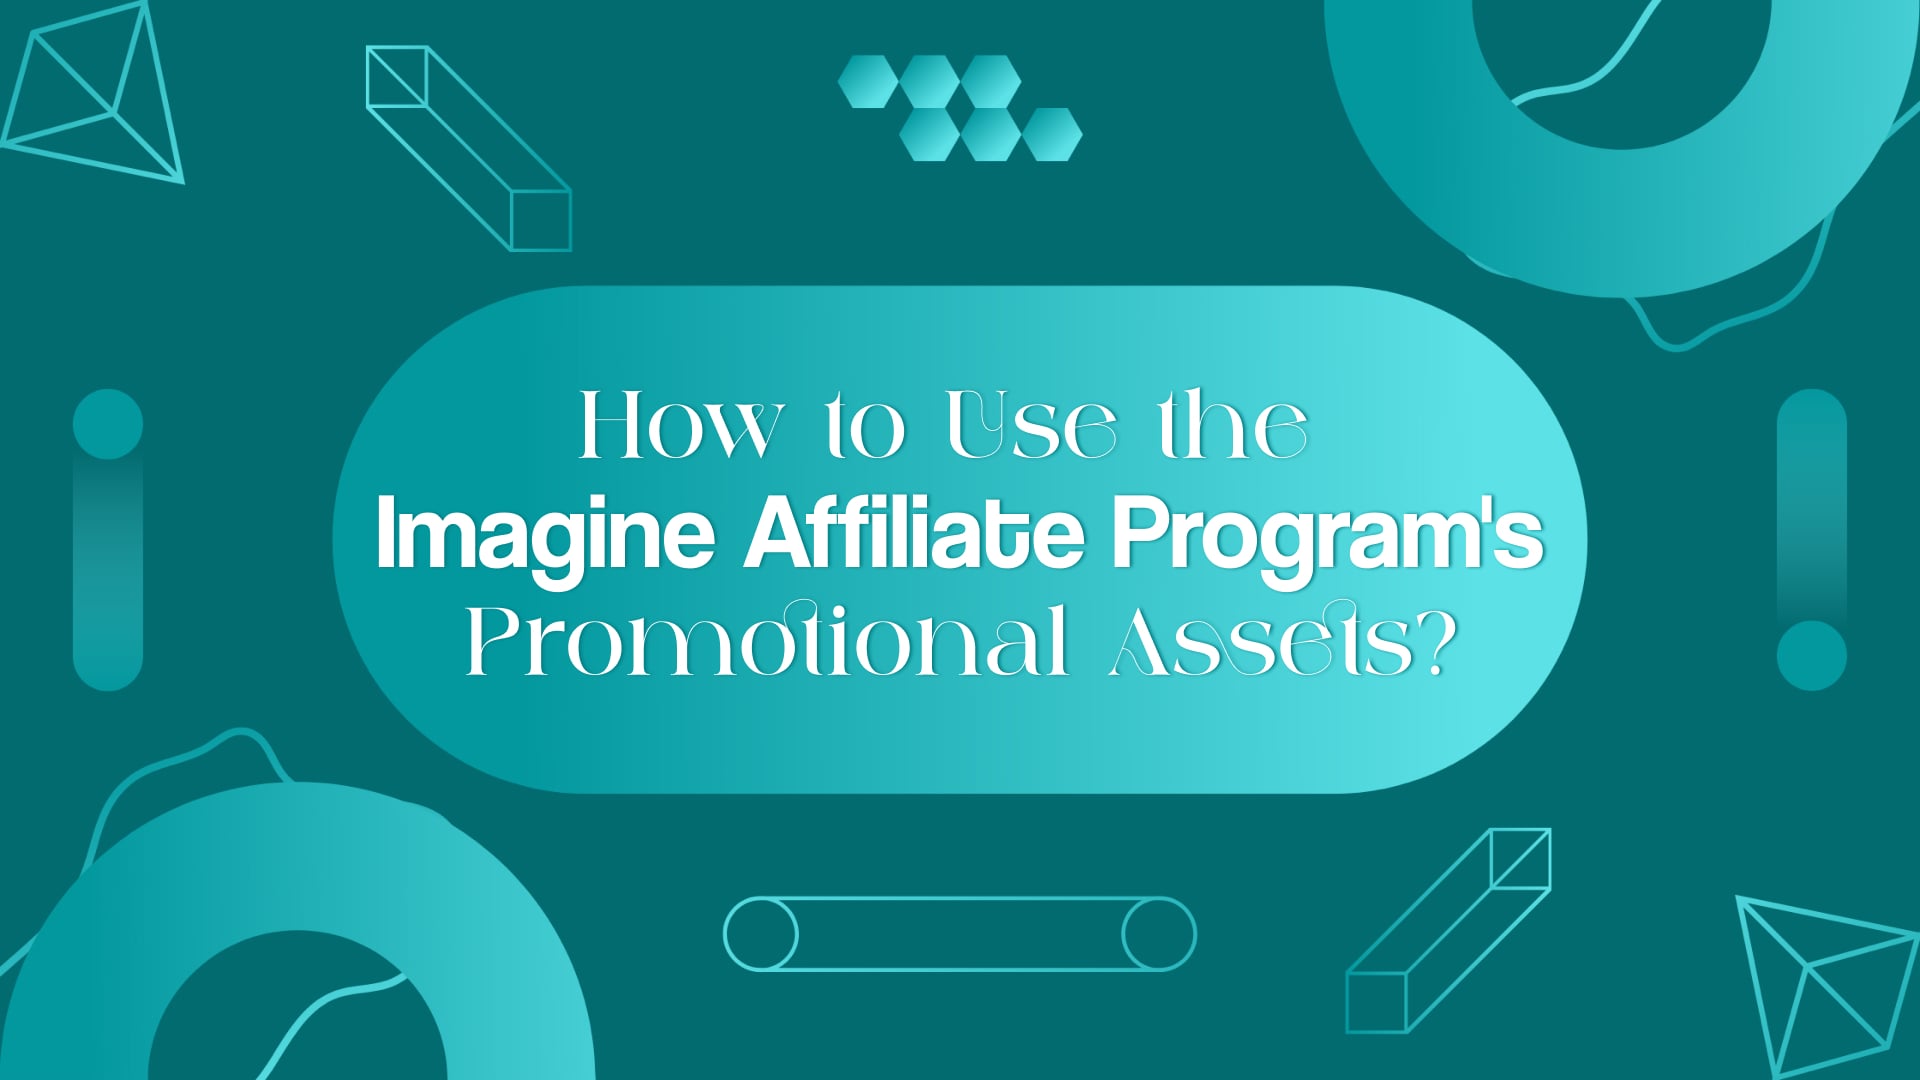 How to Use the Imagine Affiliate Program's Promotional Assets?